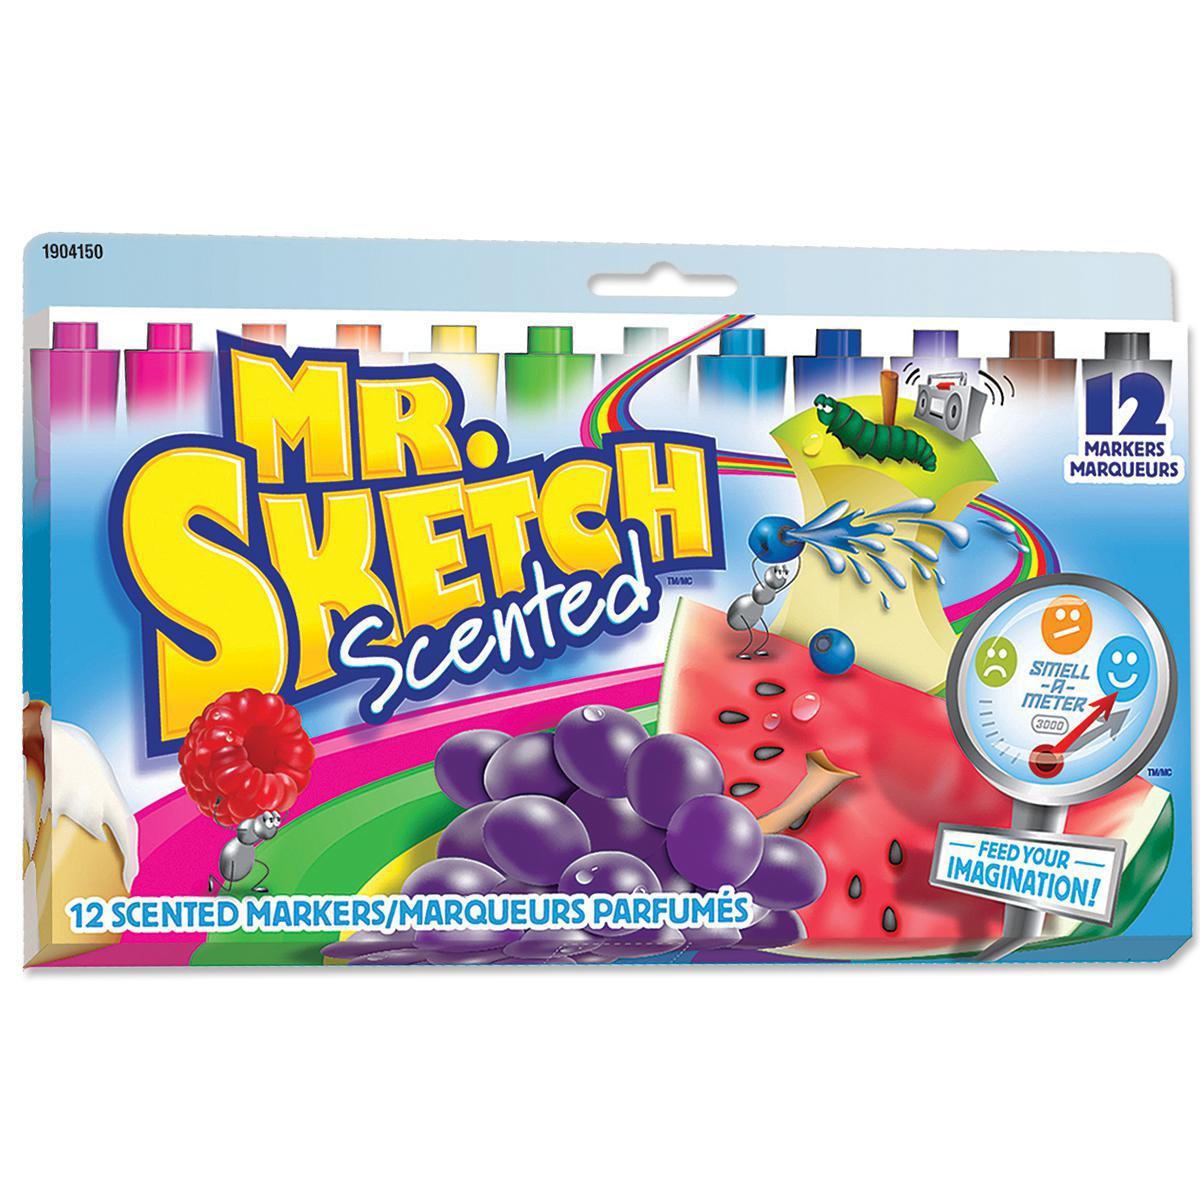  Mr. Sketch Scented Markers Pack 